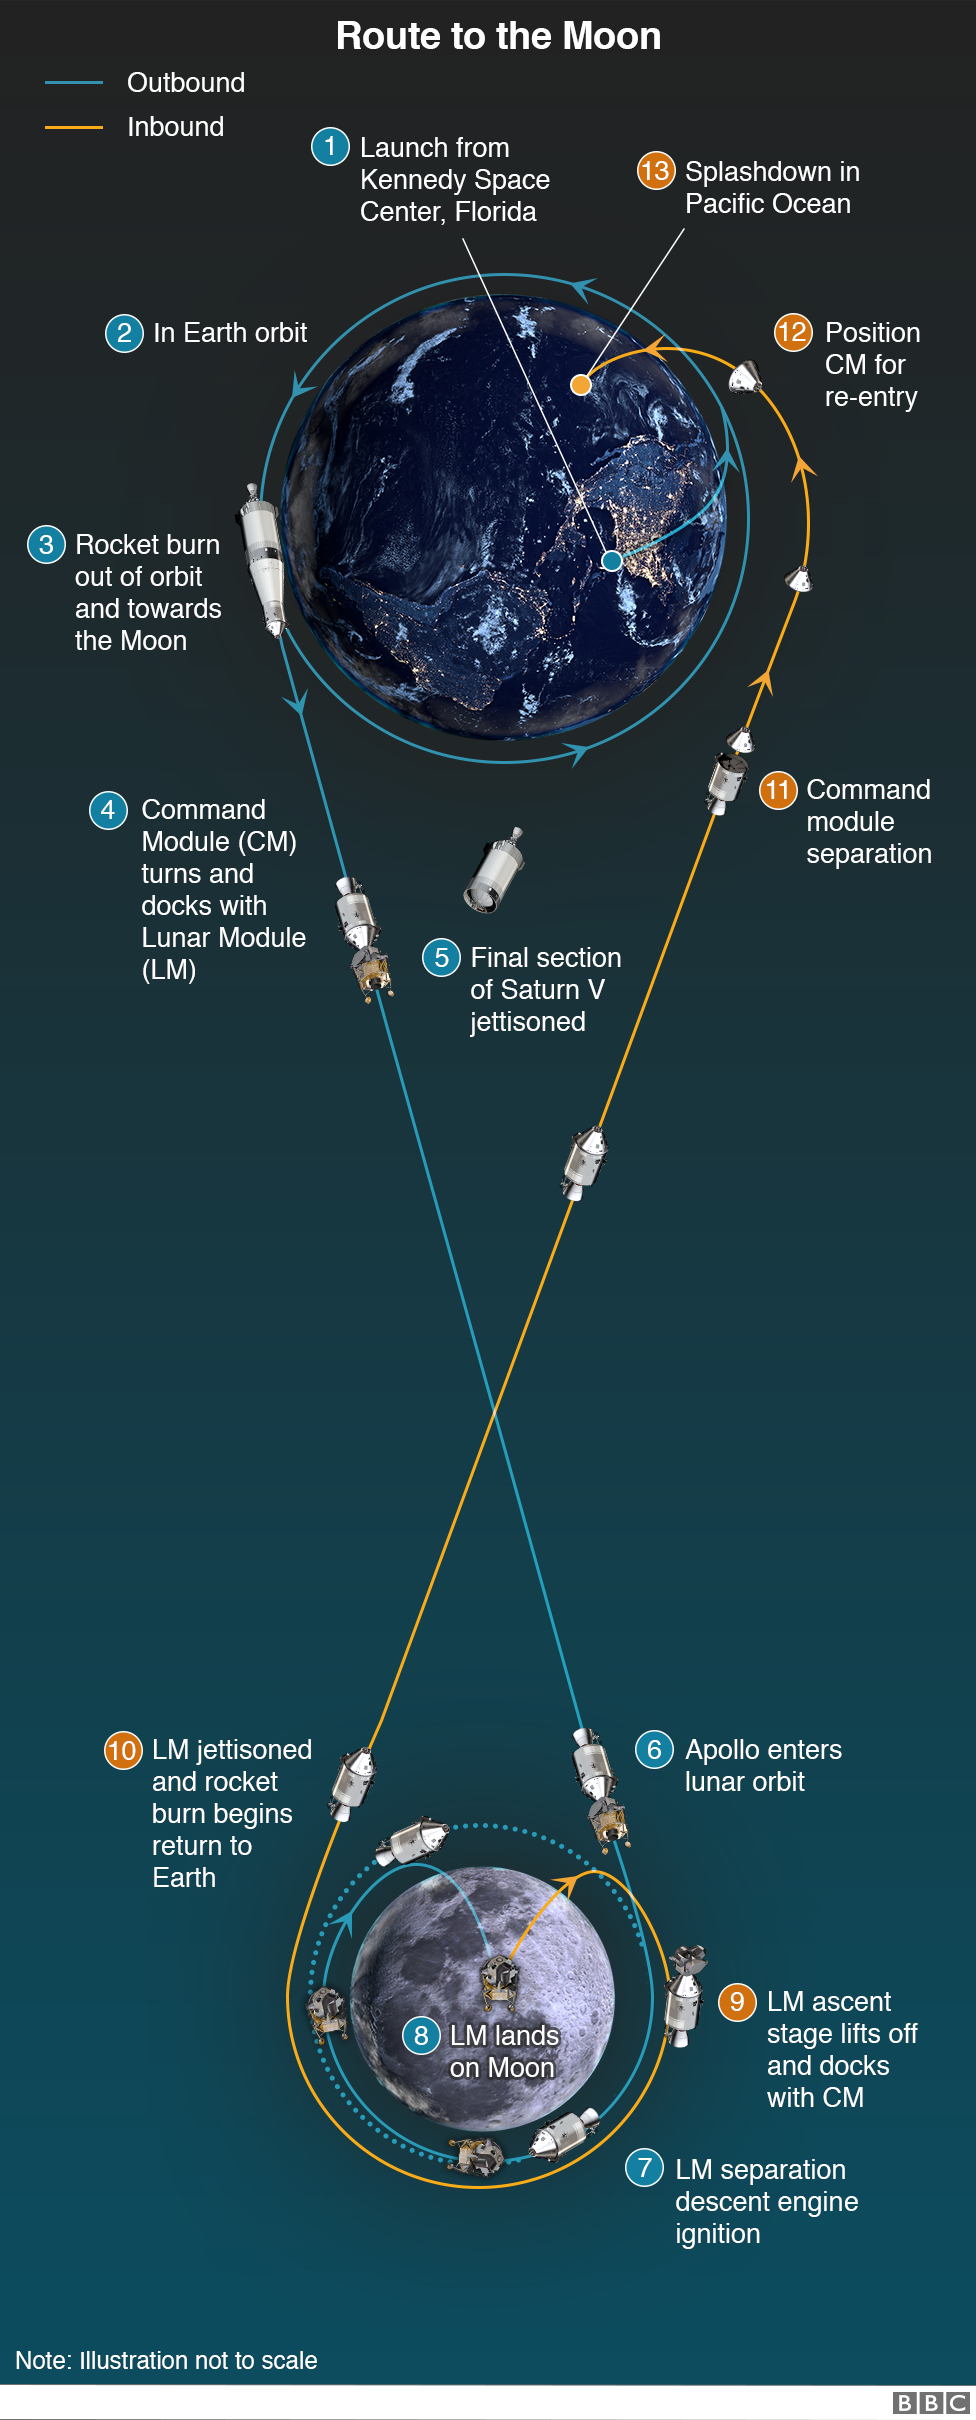 Infographic showing the route to the Moon